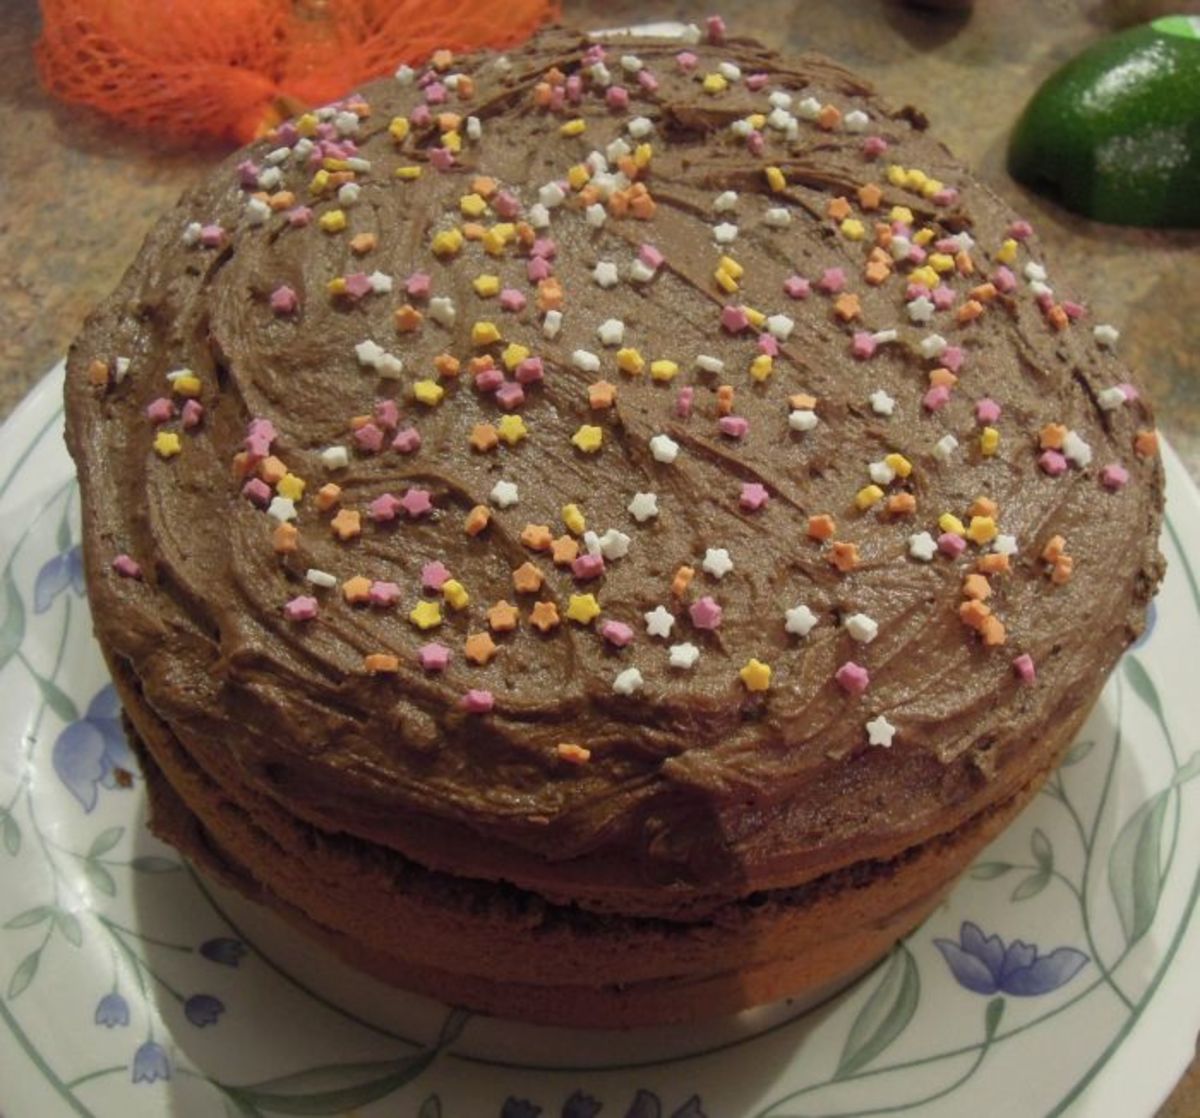 A vegan and gluten free chocolate cake (recipe link in text).